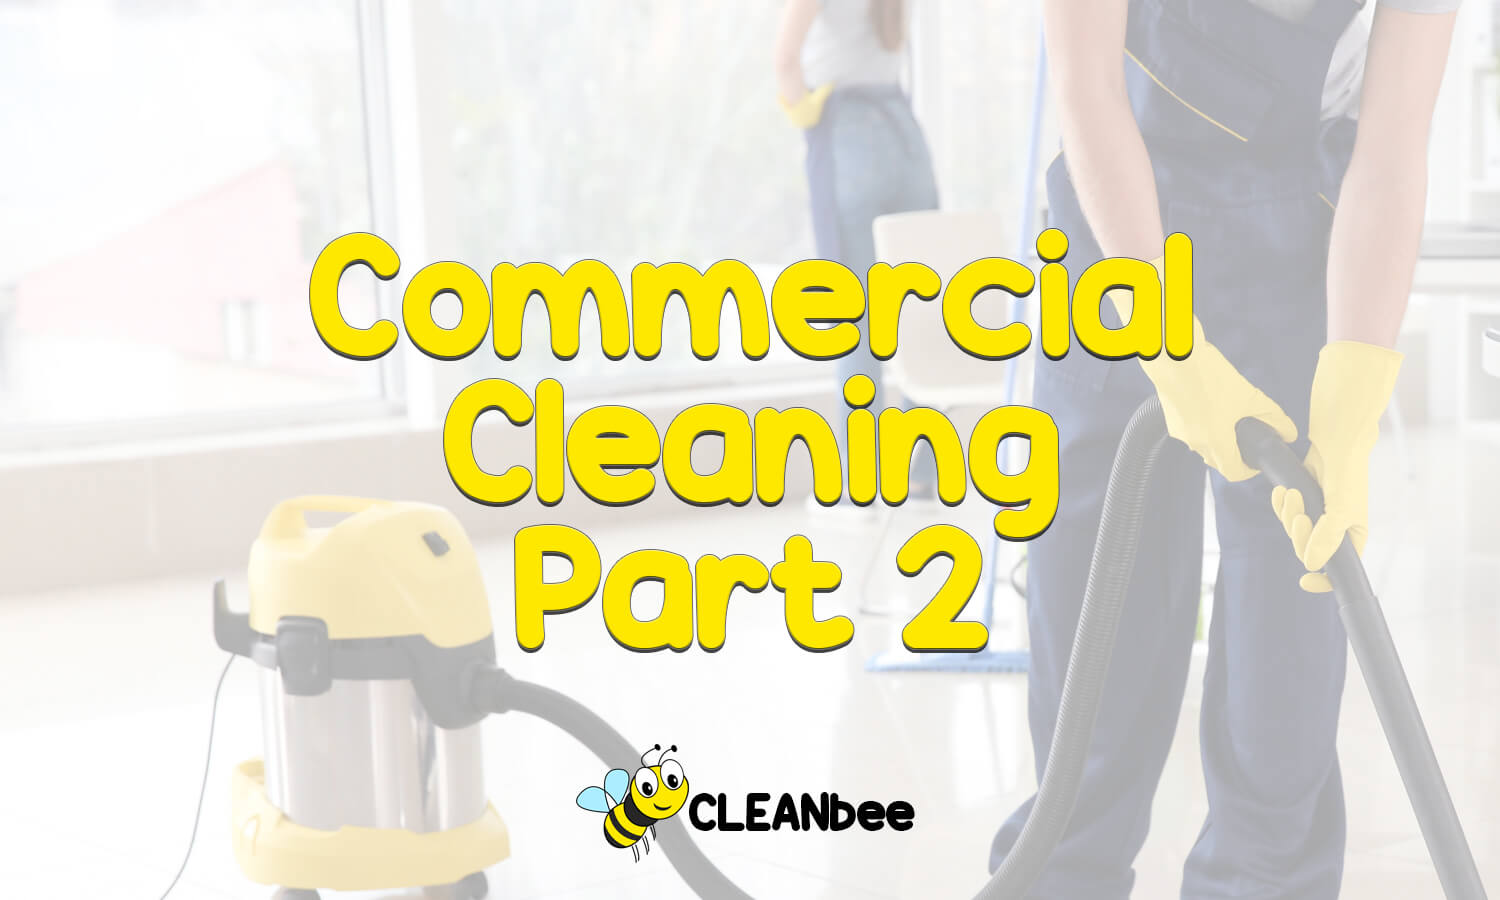 Commercial Cleaning Part 2